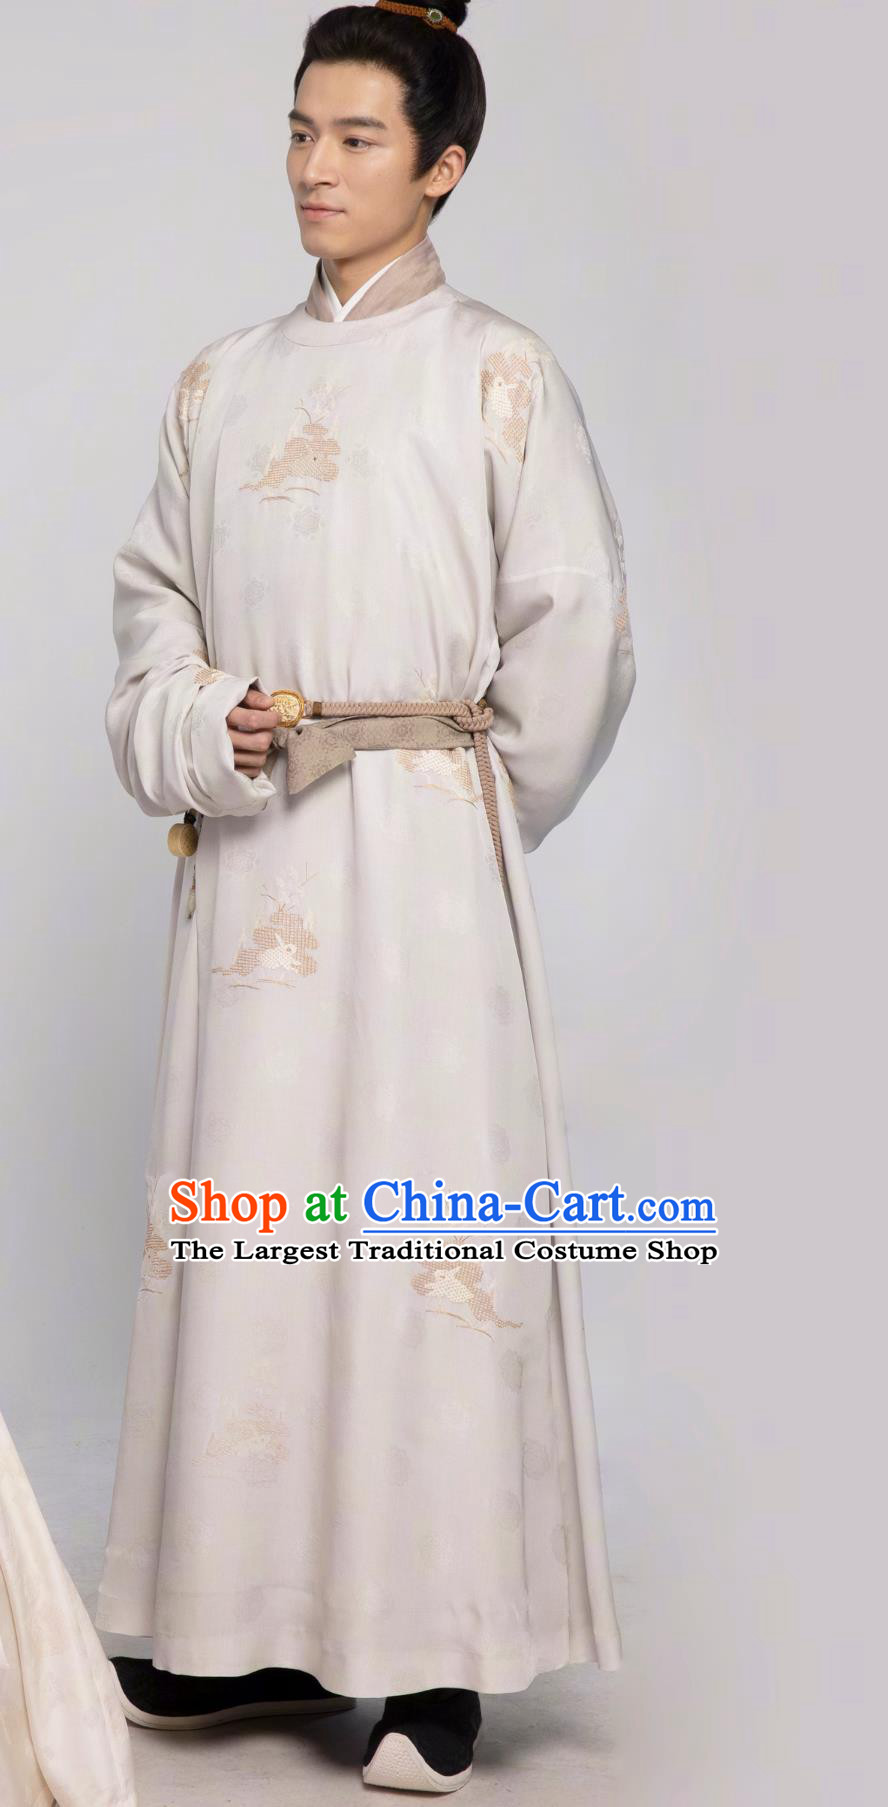 Chinese Ancient Song Dynasty Scholar Hanfu Clothing TV Series Scent Of Time Young Lord Zhong Xi Wu Costumes